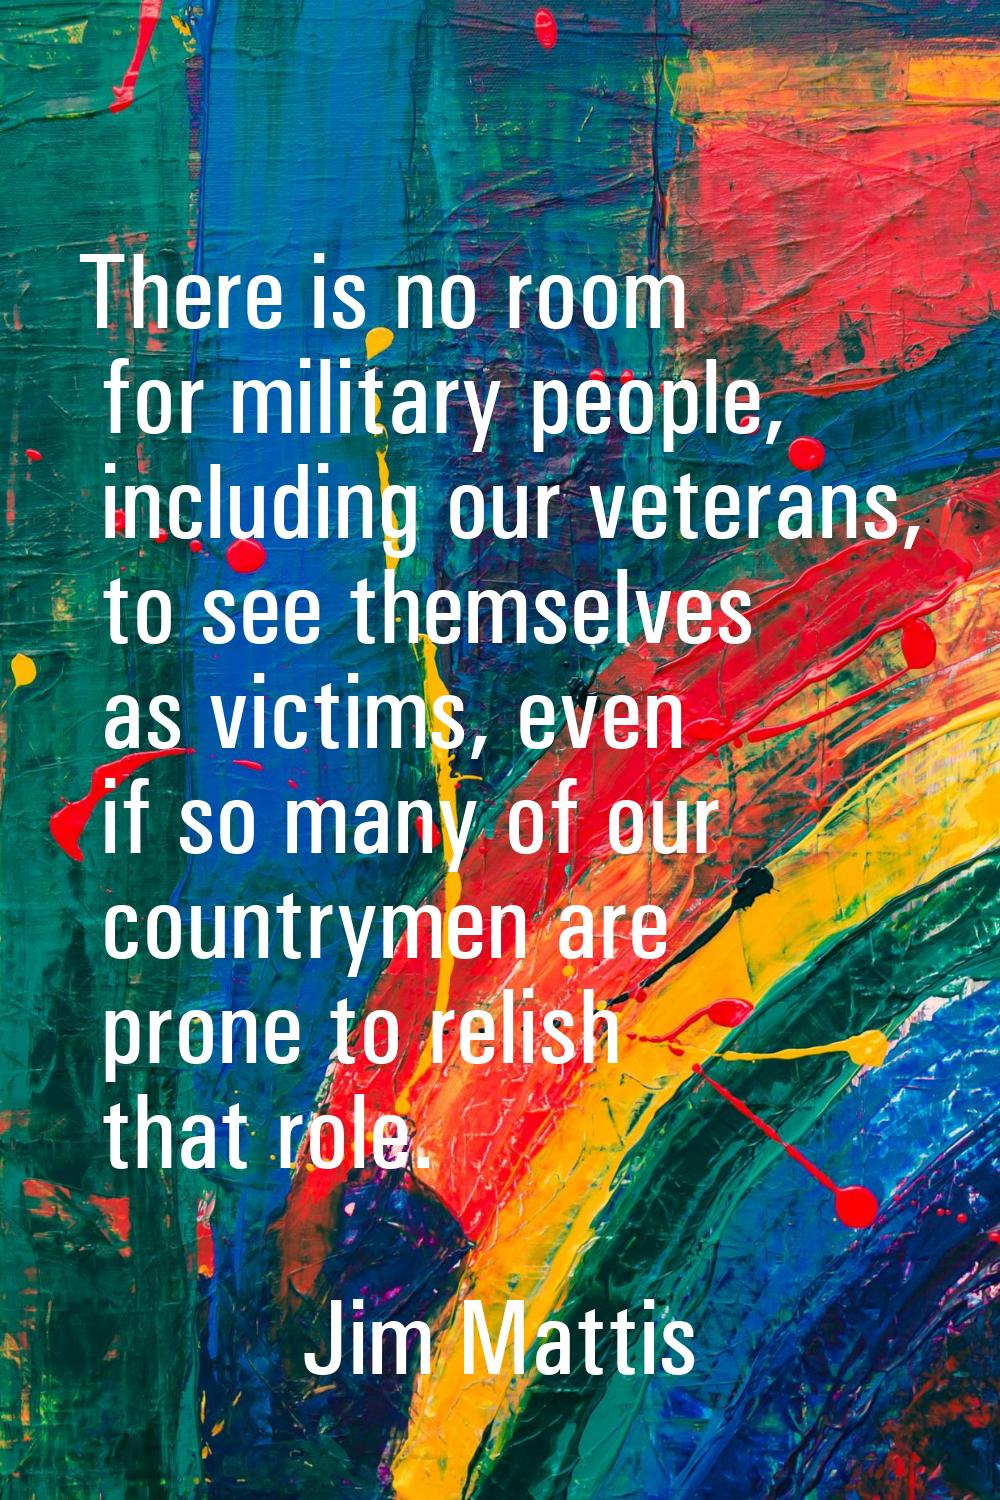 There is no room for military people, including our veterans, to see themselves as victims, even if